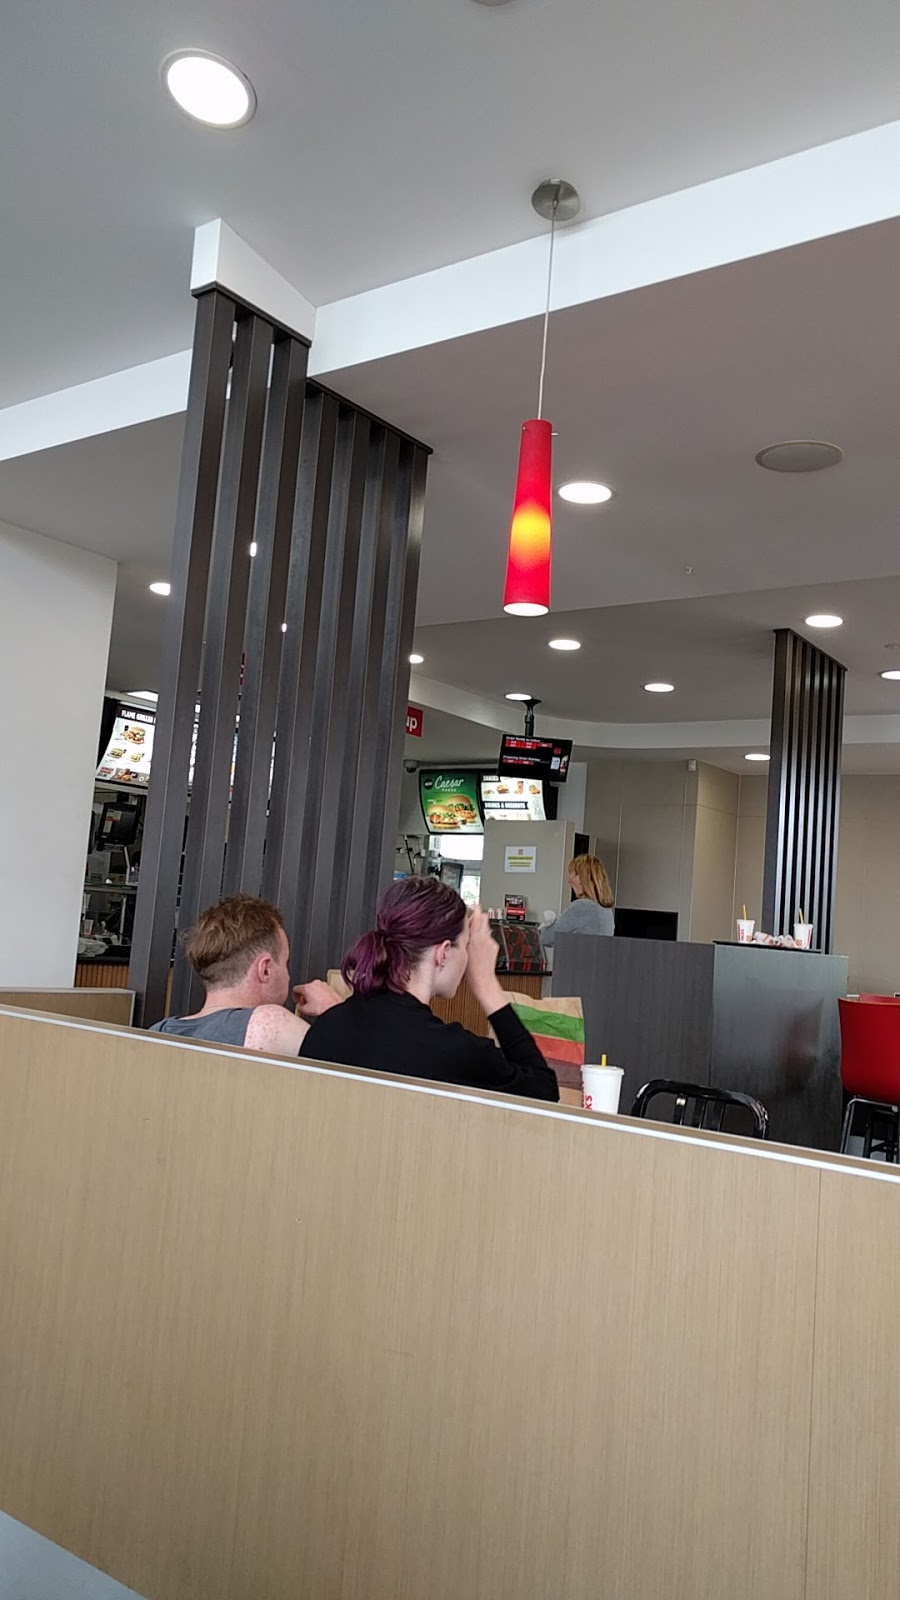 Hungry Jacks Carrum Downs | restaurant | 100 Hall Rd, Carrum Downs VIC 3201, Australia | 0397828937 OR +61 3 9782 8937